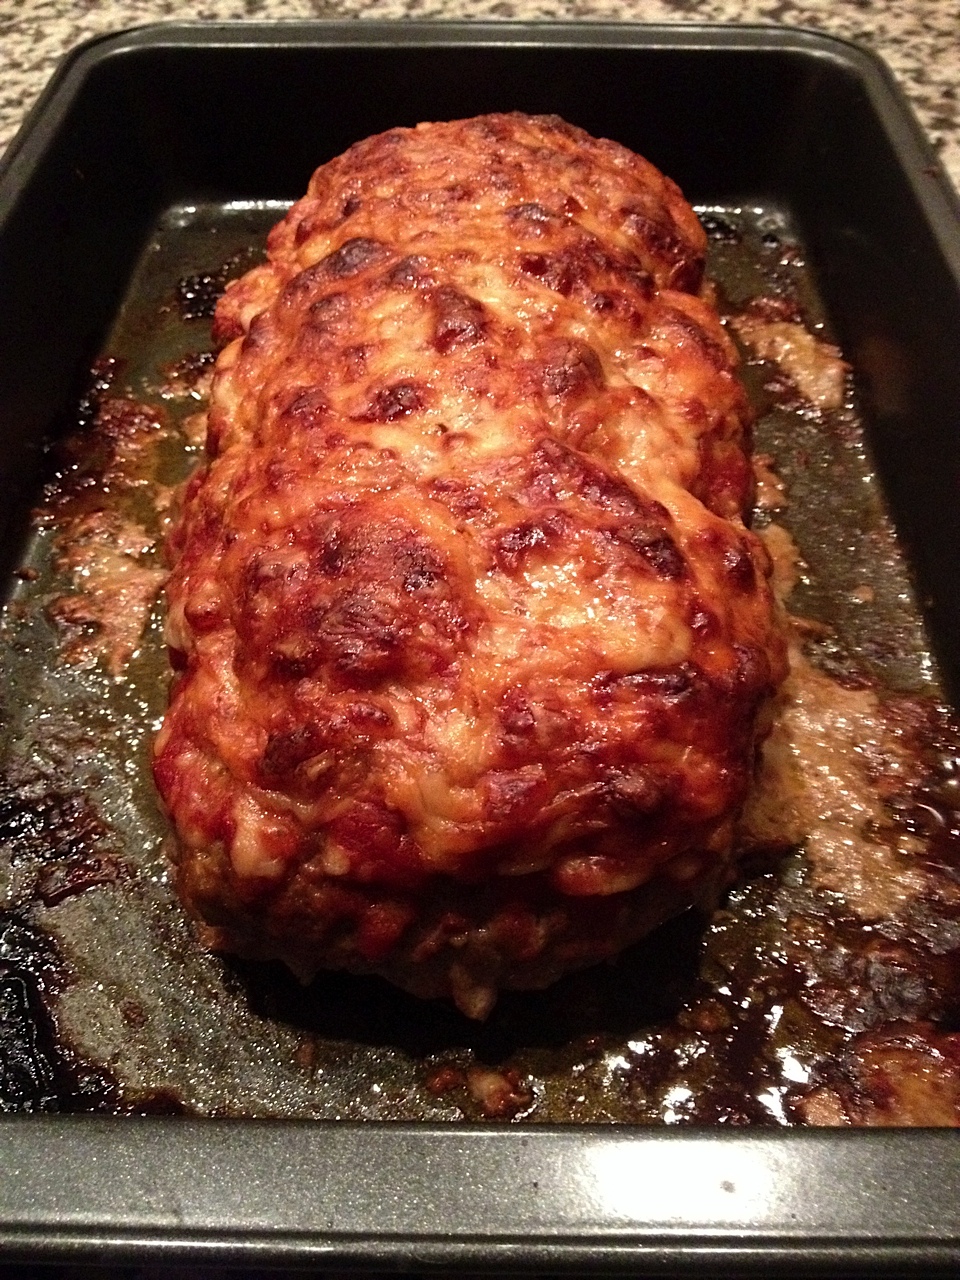 meatloaf stuffed with spinach